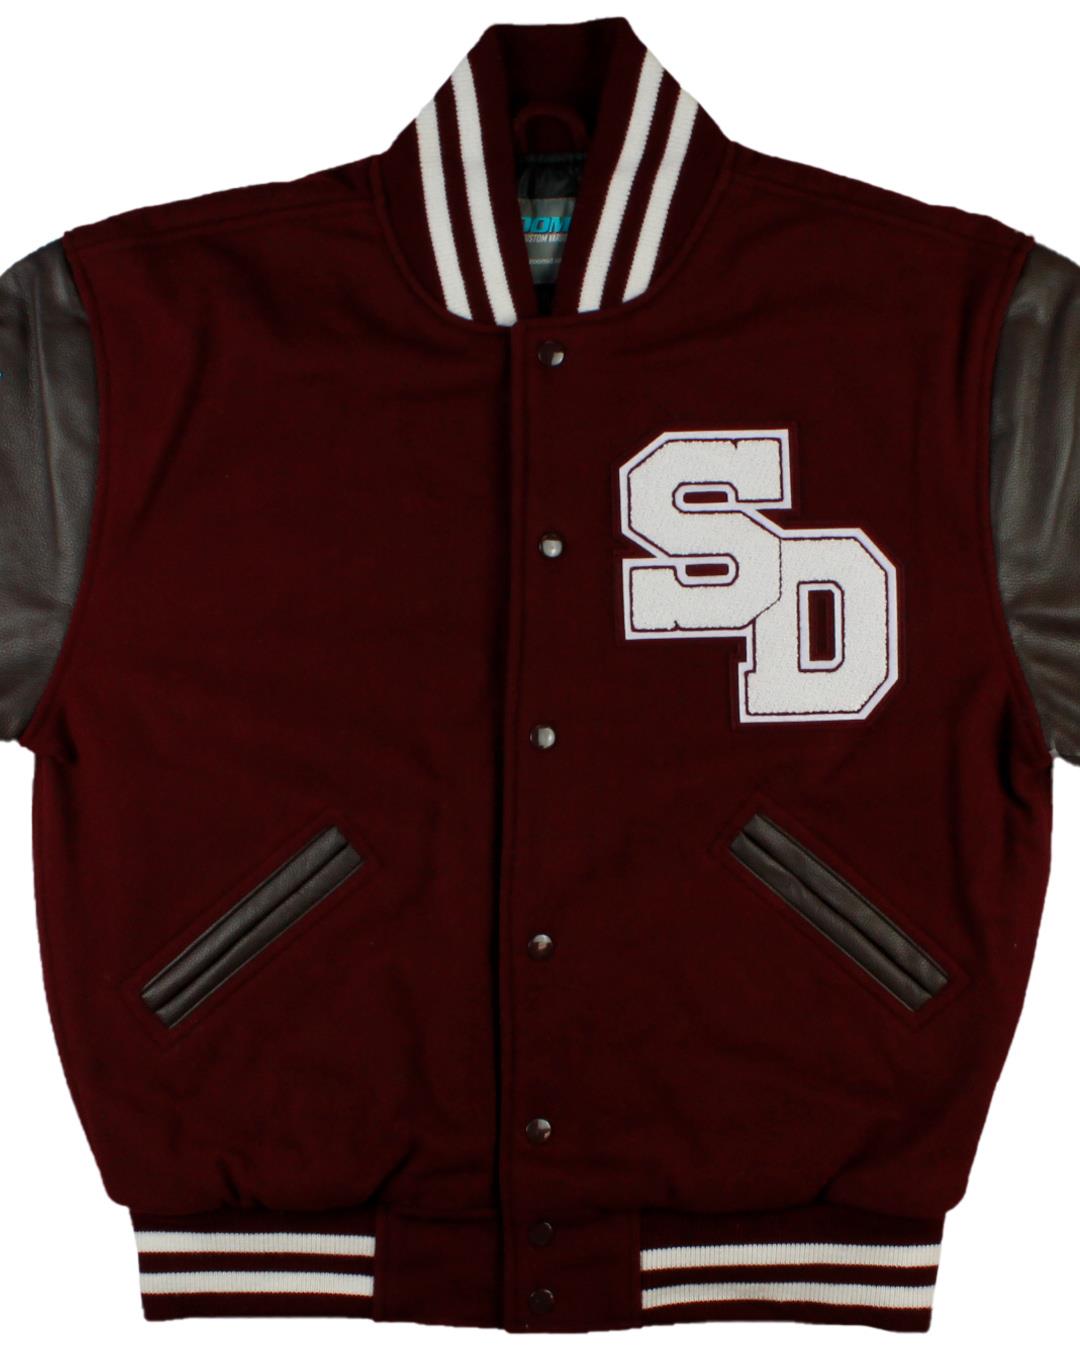 South Decatur High School Varsity Jacket, Greensburg, IN - Front